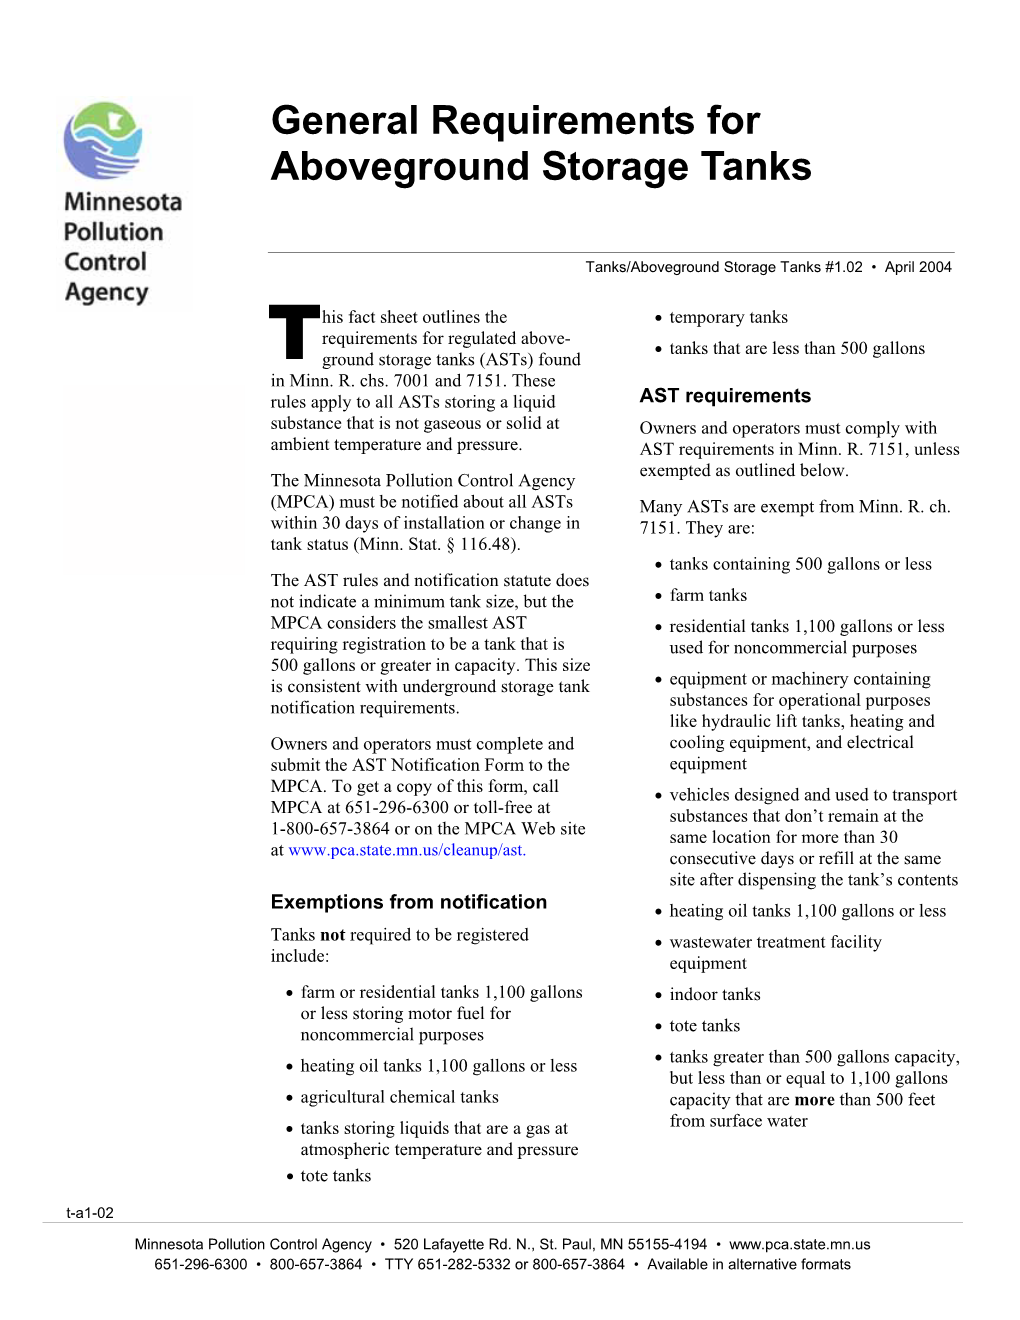 General Requirements for Aboveground Storage Tanks